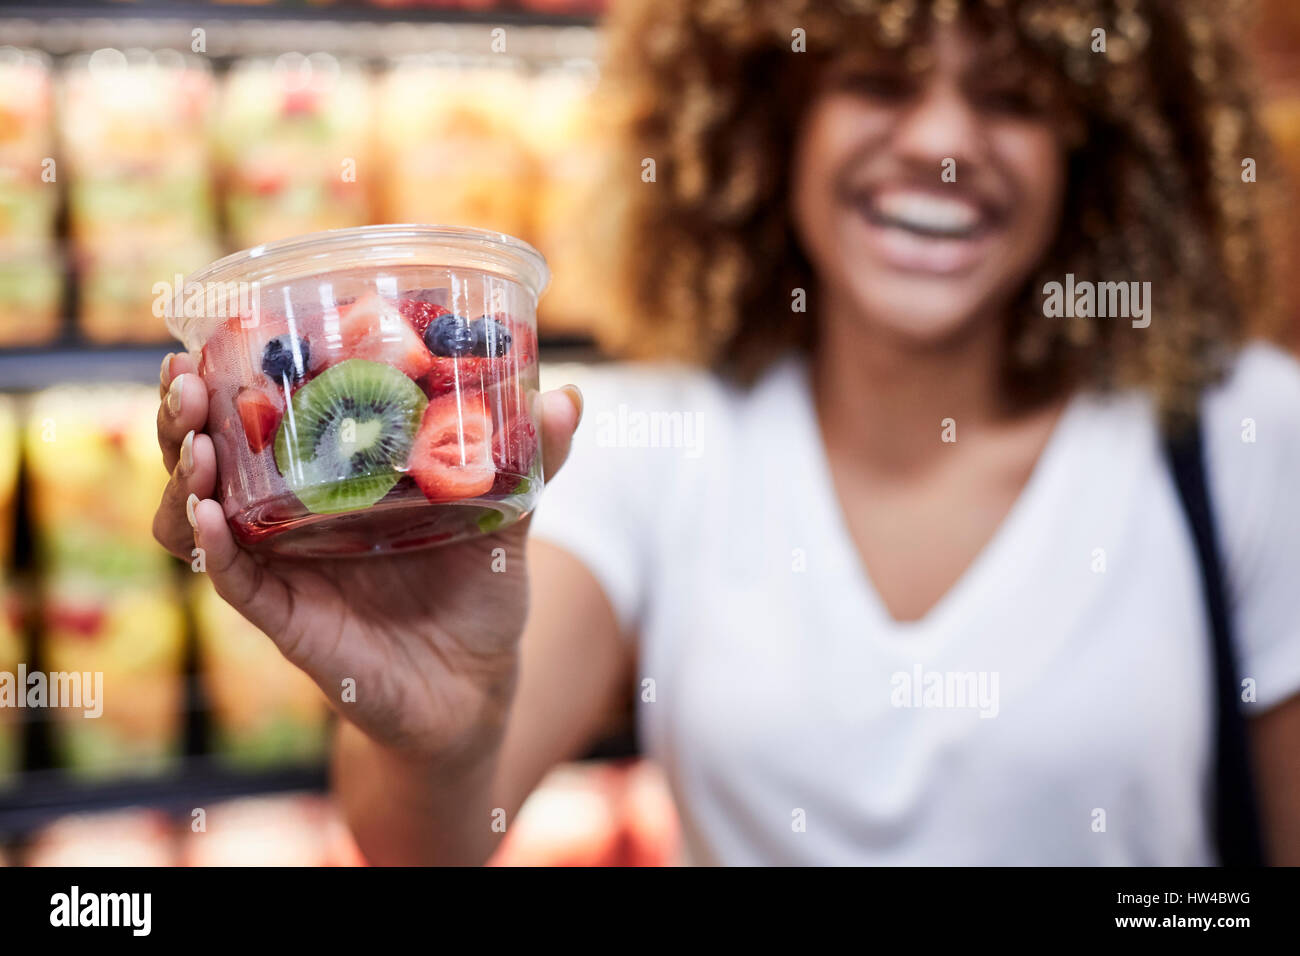 Black woman cup of fruit salad in grocery store Stock Photo